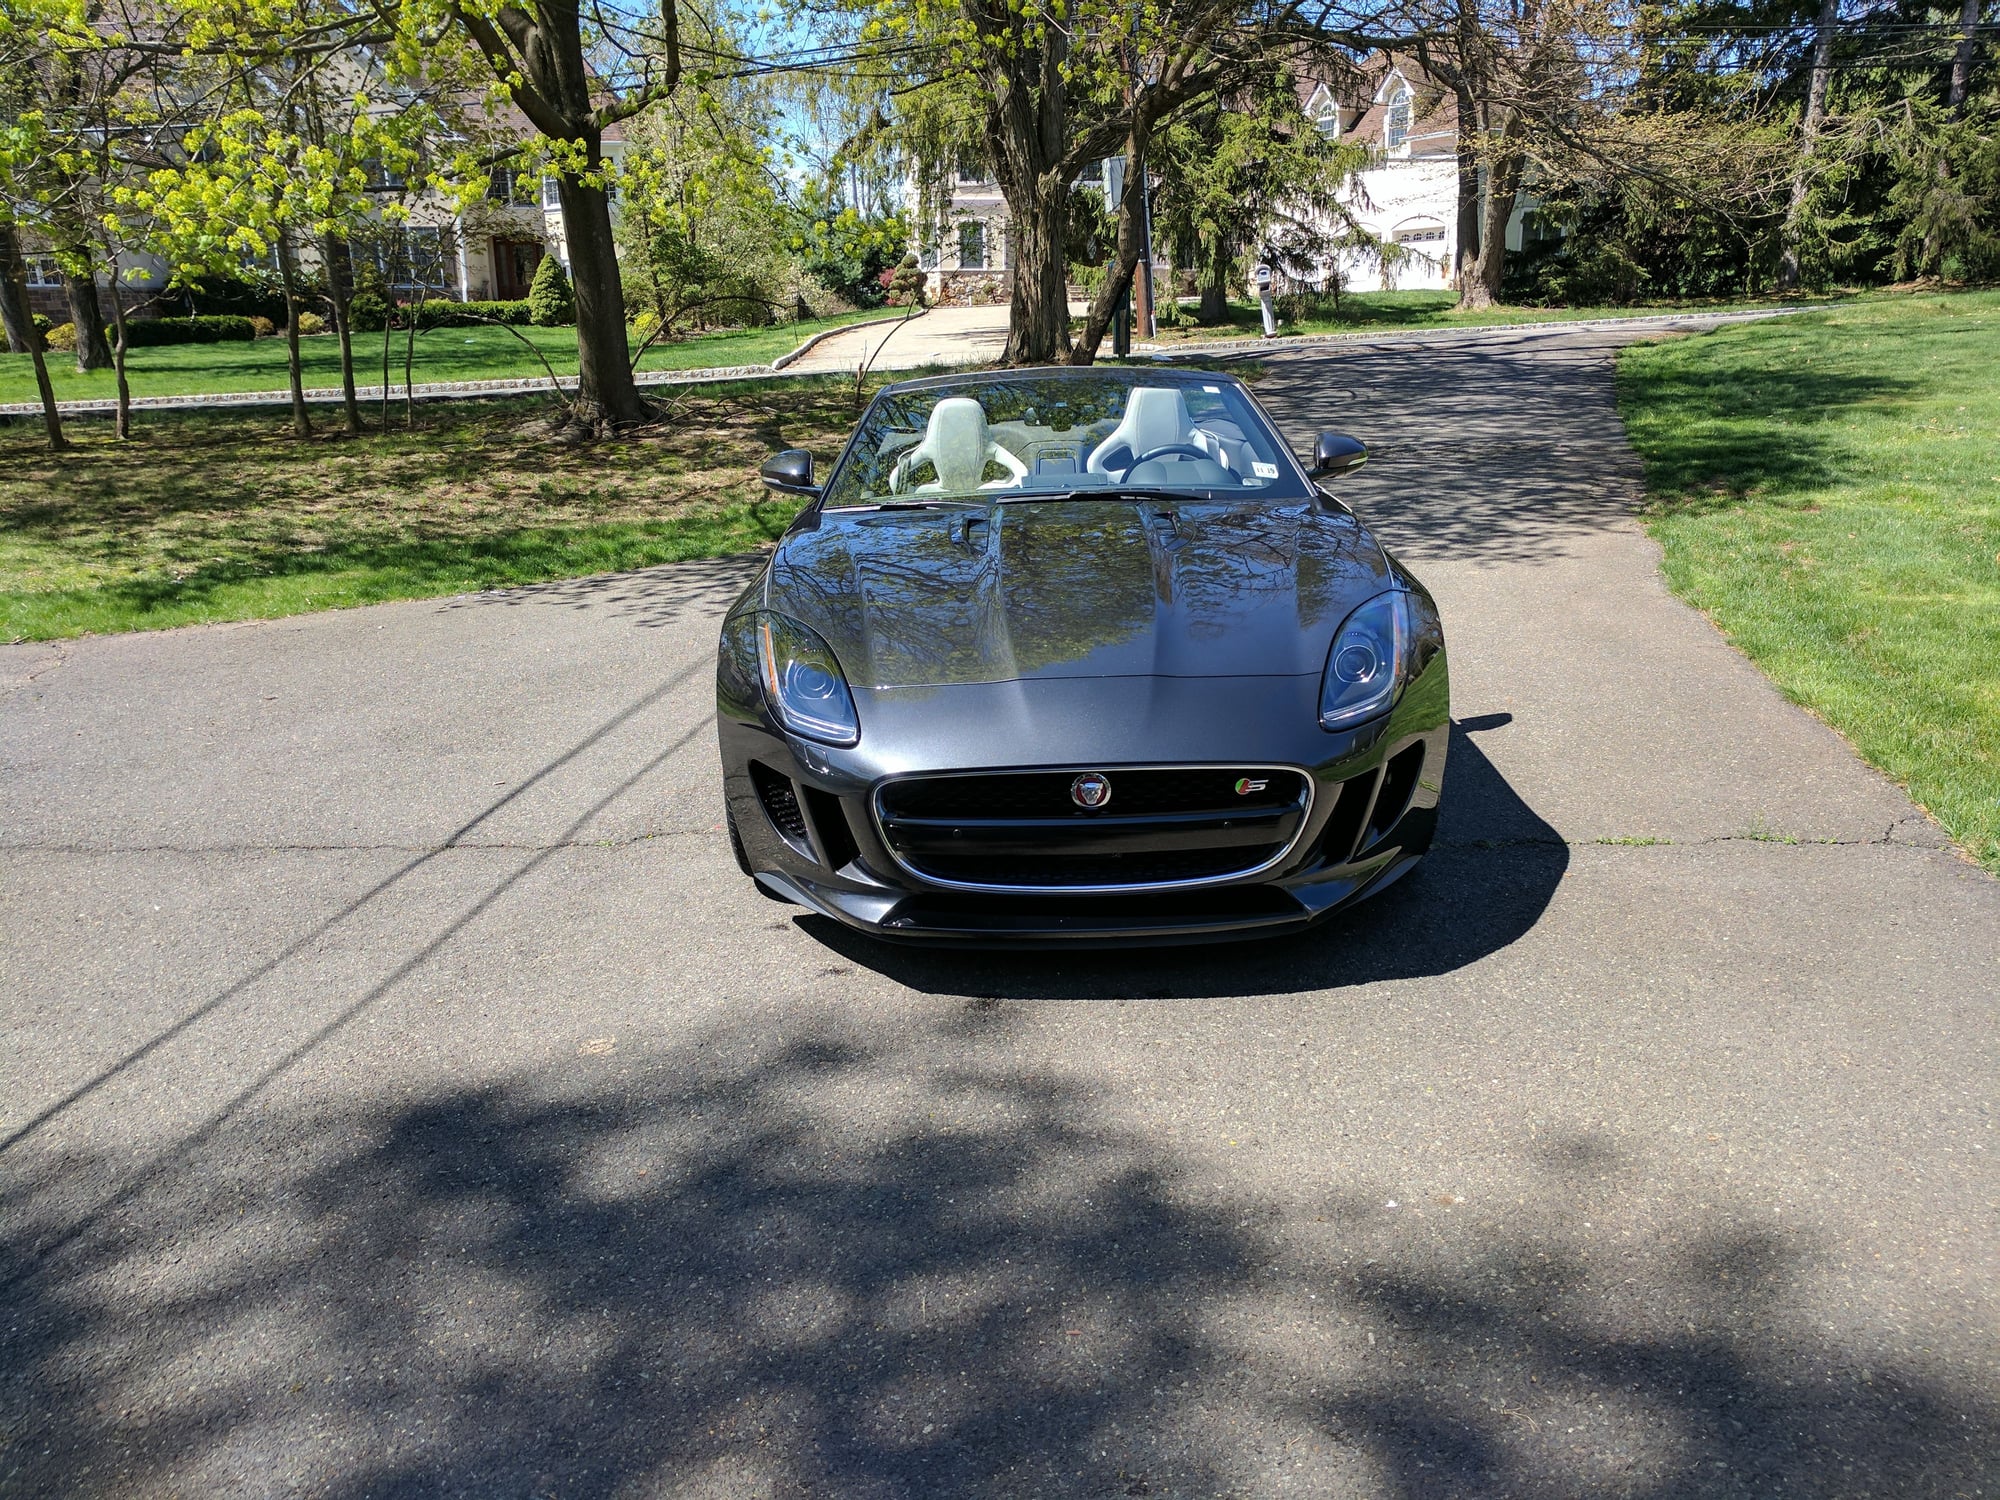 2015 Jaguar F-Type - Stratus Grey f type V8S - Used - VIN SAJWA6GLXFMK18685 - 5,223 Miles - 8 cyl - Automatic - Convertible - Gray - Watchung, NJ 07069, United States